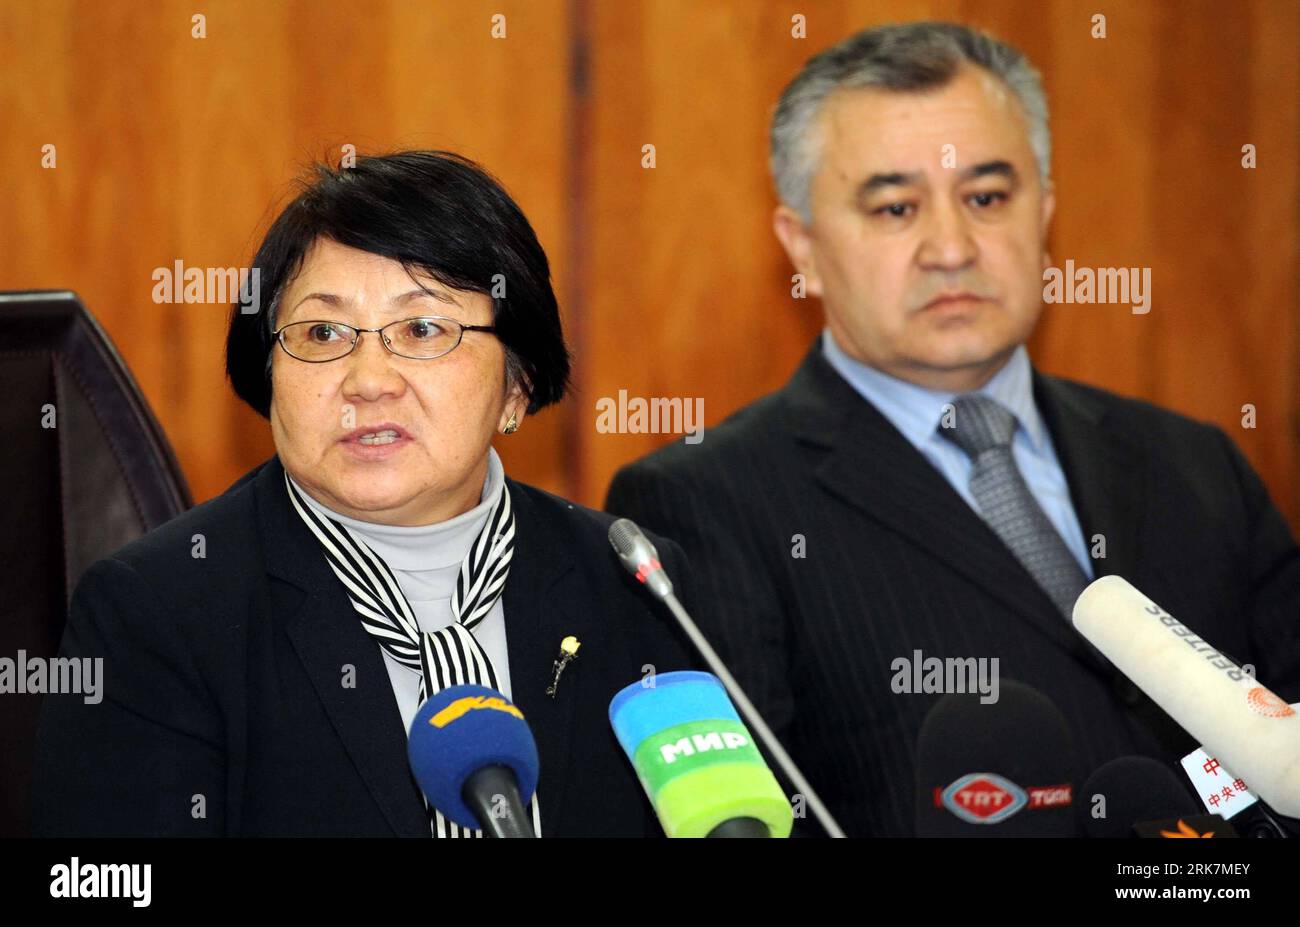 Bildnummer: 53928021  Datum: 08.04.2010  Copyright: imago/Xinhua  Interim government leader Roza Otunbayeva (L), and Omurbek Tekebayev, chairman of the opposition Ata-jurt movement (fatherland), attend a press conference in Bishkek, capital of Kyrgyzstan, April 8, 2010. Kyrgyz opposition parties on Thursday formed an interim coalition government, while President  refused to step down after clashes that left at least 75 dead and another 1,000 injured. (Xinhua/Sadat) (lmz) (11)KYRGYZSTAN-BISHKEK-UNREST-PRESS CONFERENCE PUBLICATIONxNOTxINxCHN Politik Putsch Kirgistan People Übergangsregierung Por Stock Photo